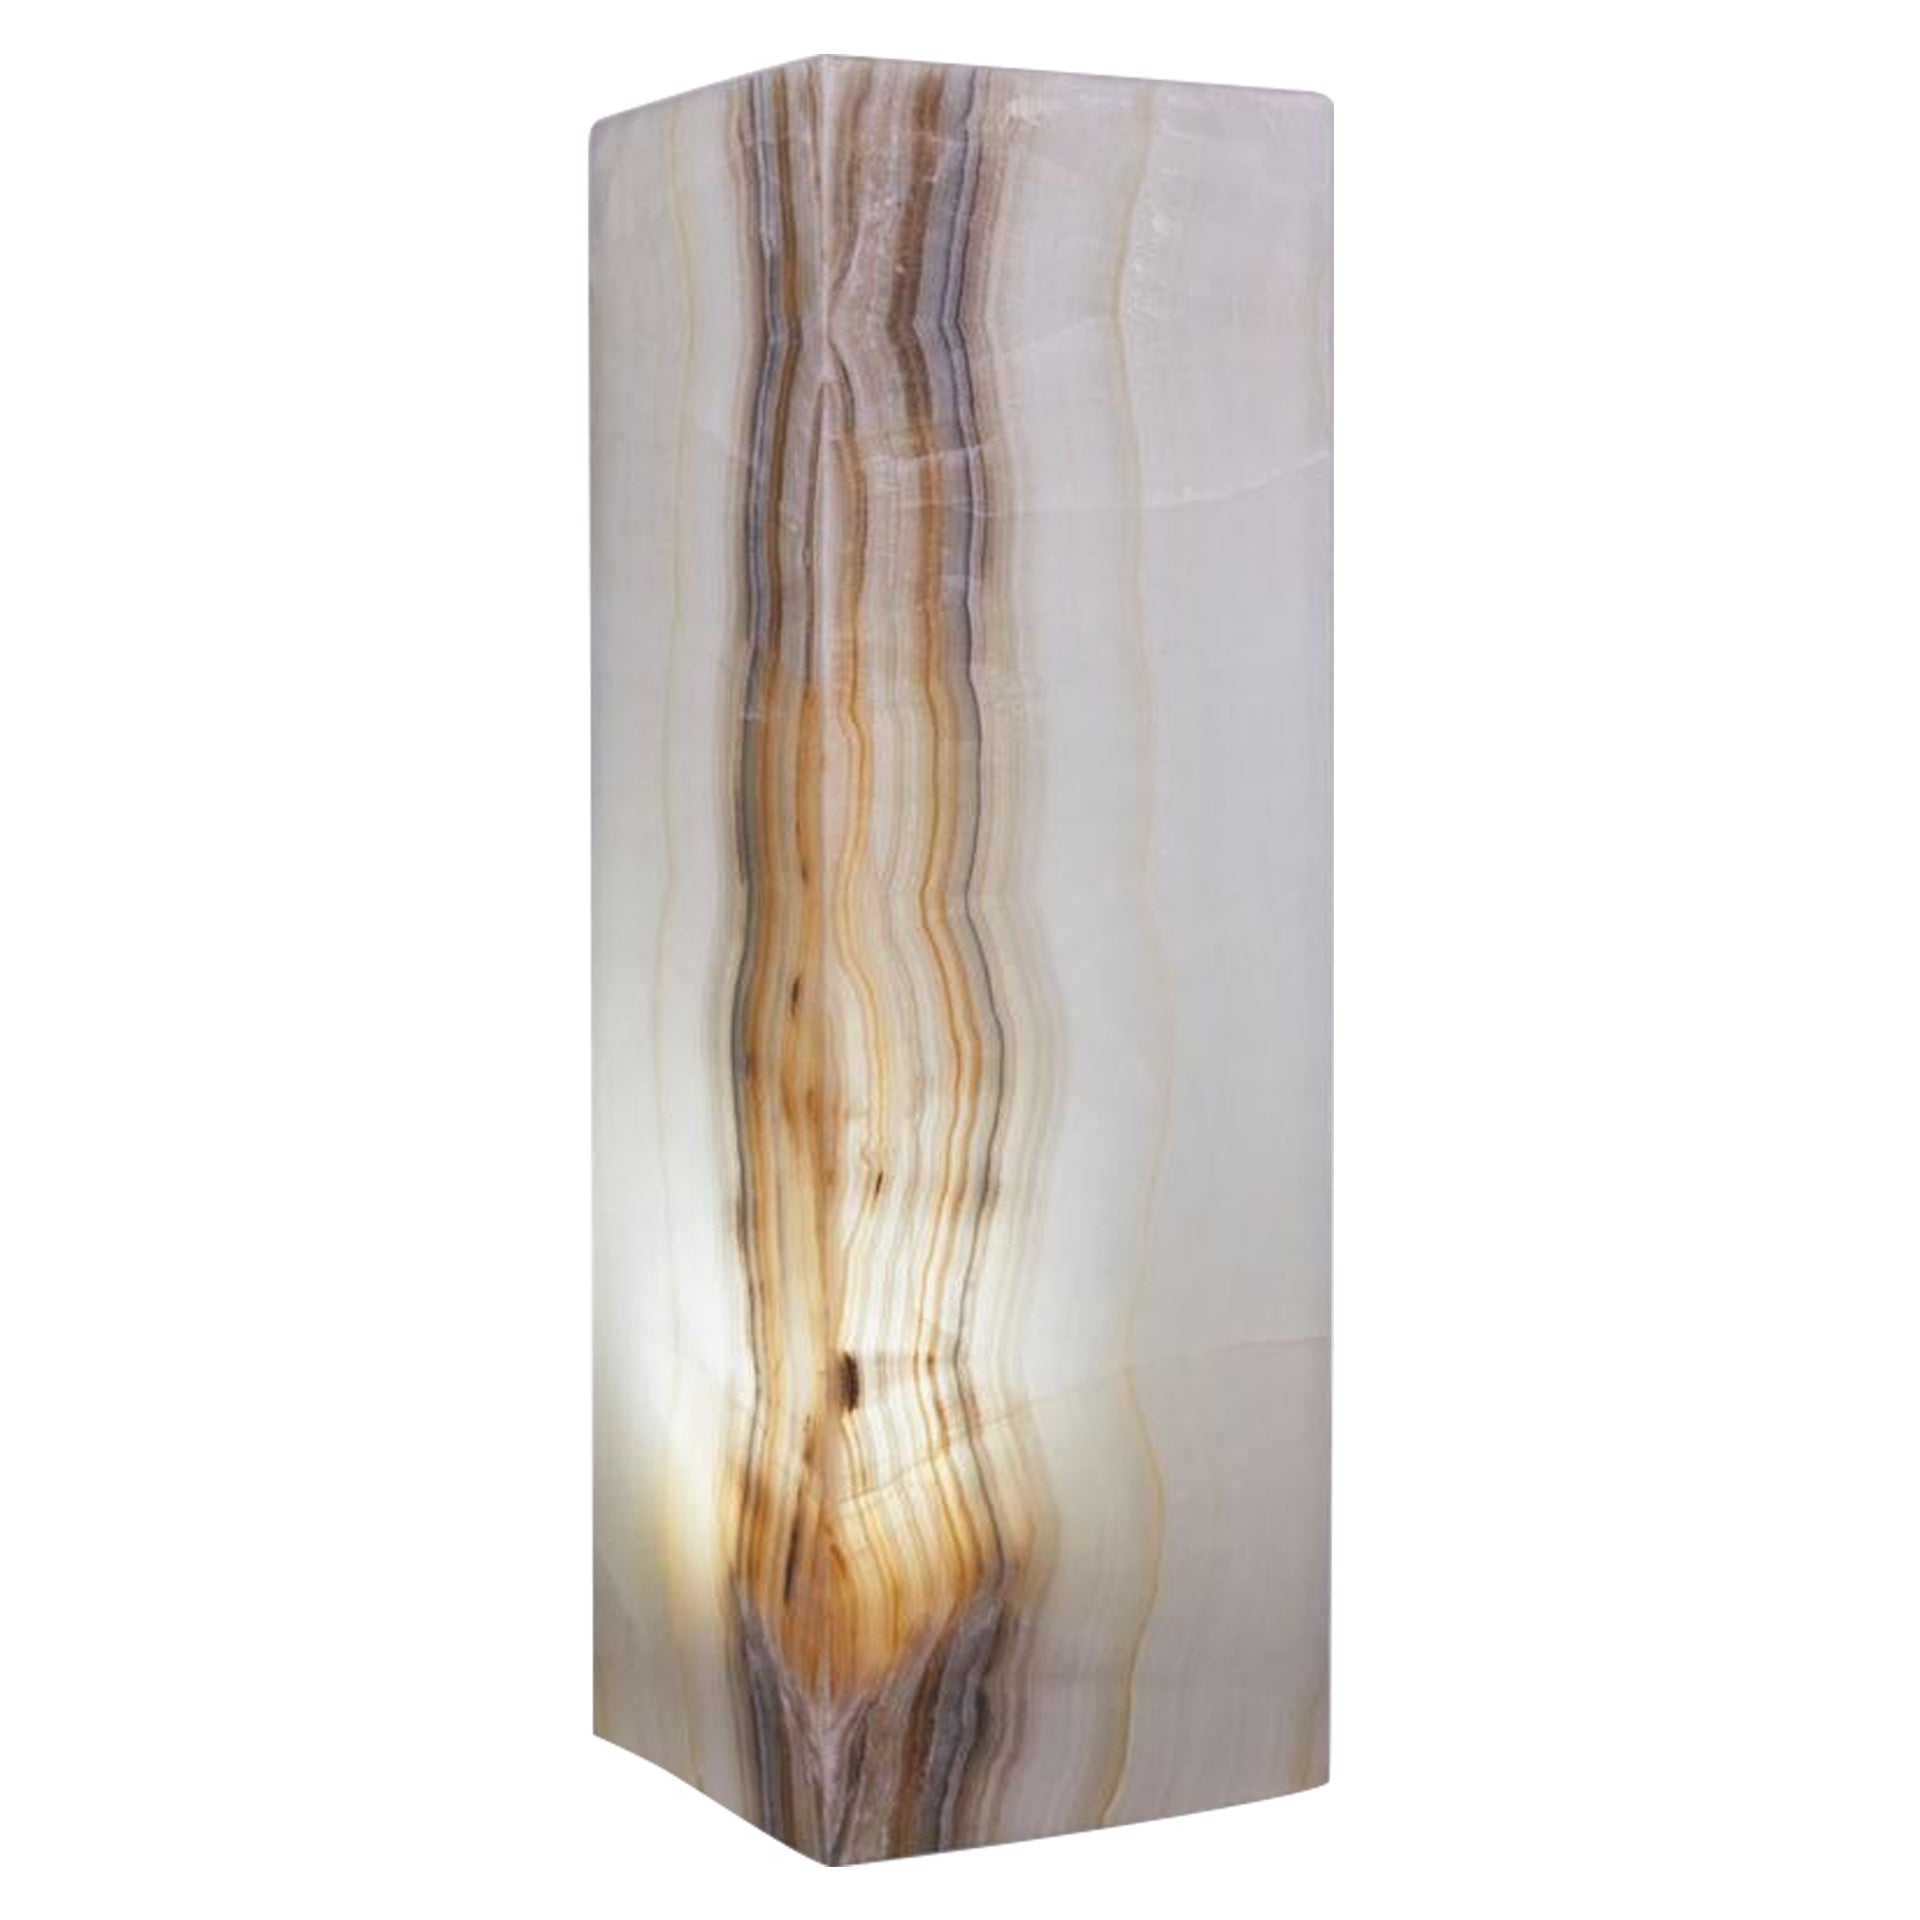 Stunning Onyx Lamp For Sale